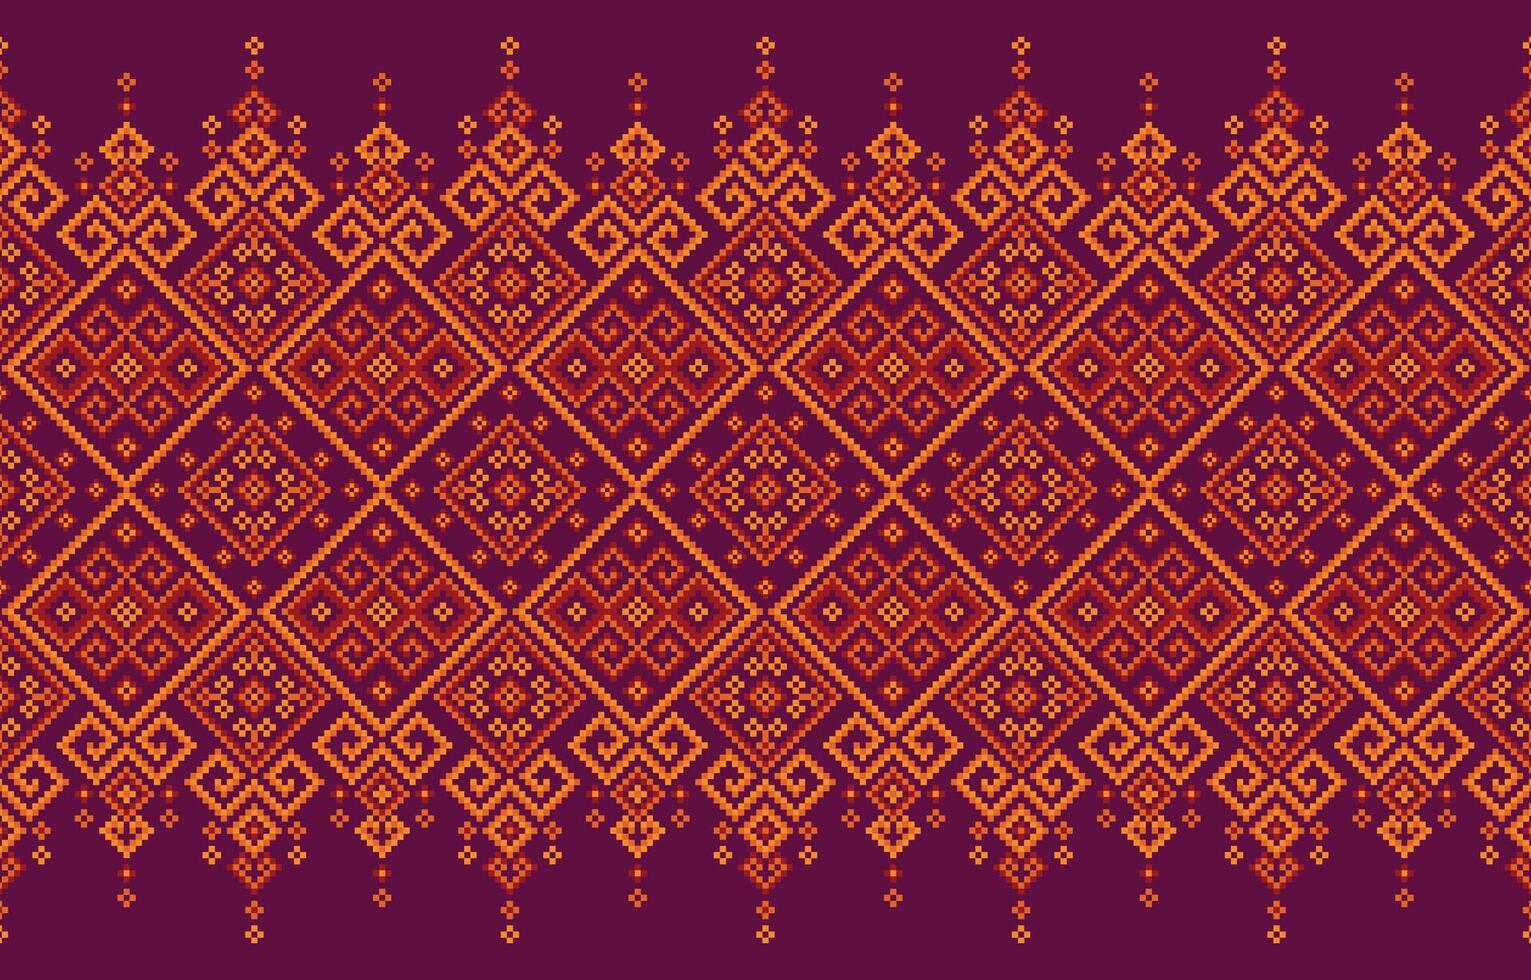 Ethnic geometry pattern retro textile ikat vector graphic pattern beautiful background design by retro geometric indian fabric colorful ornament african print  aztec cross-stitch cross carpet.